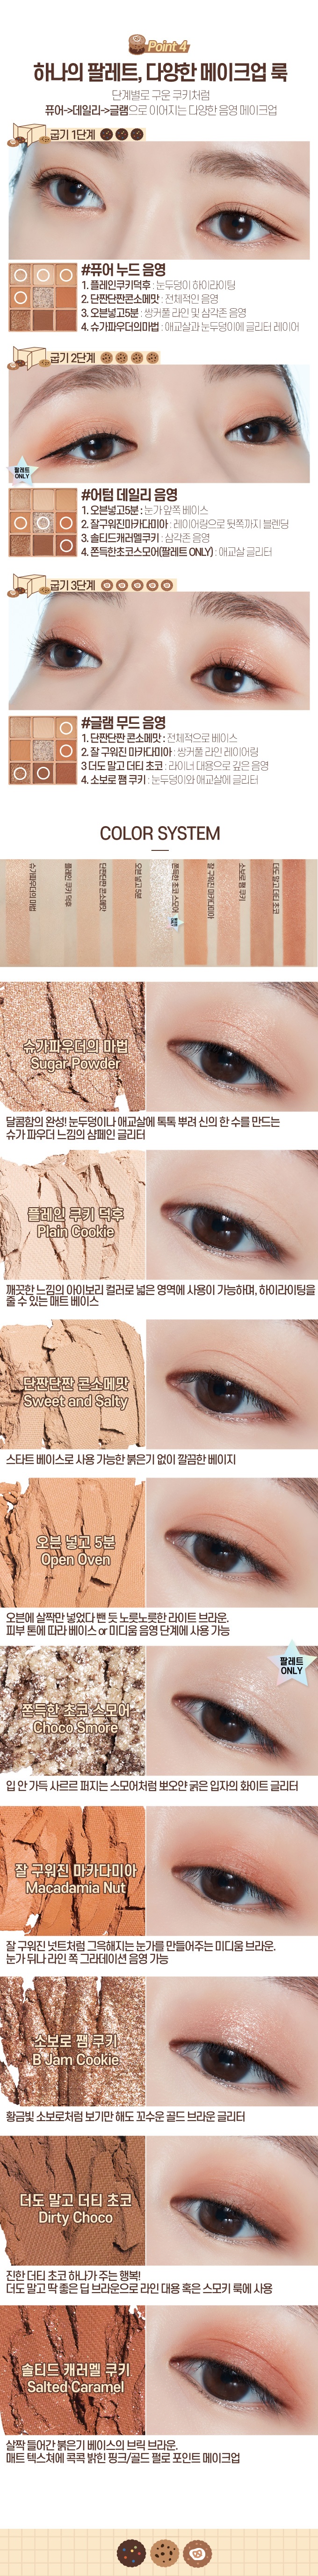 Etude House Play Color Eyes Cookie Chips korean skincare product online shop malaysia China taiwan2